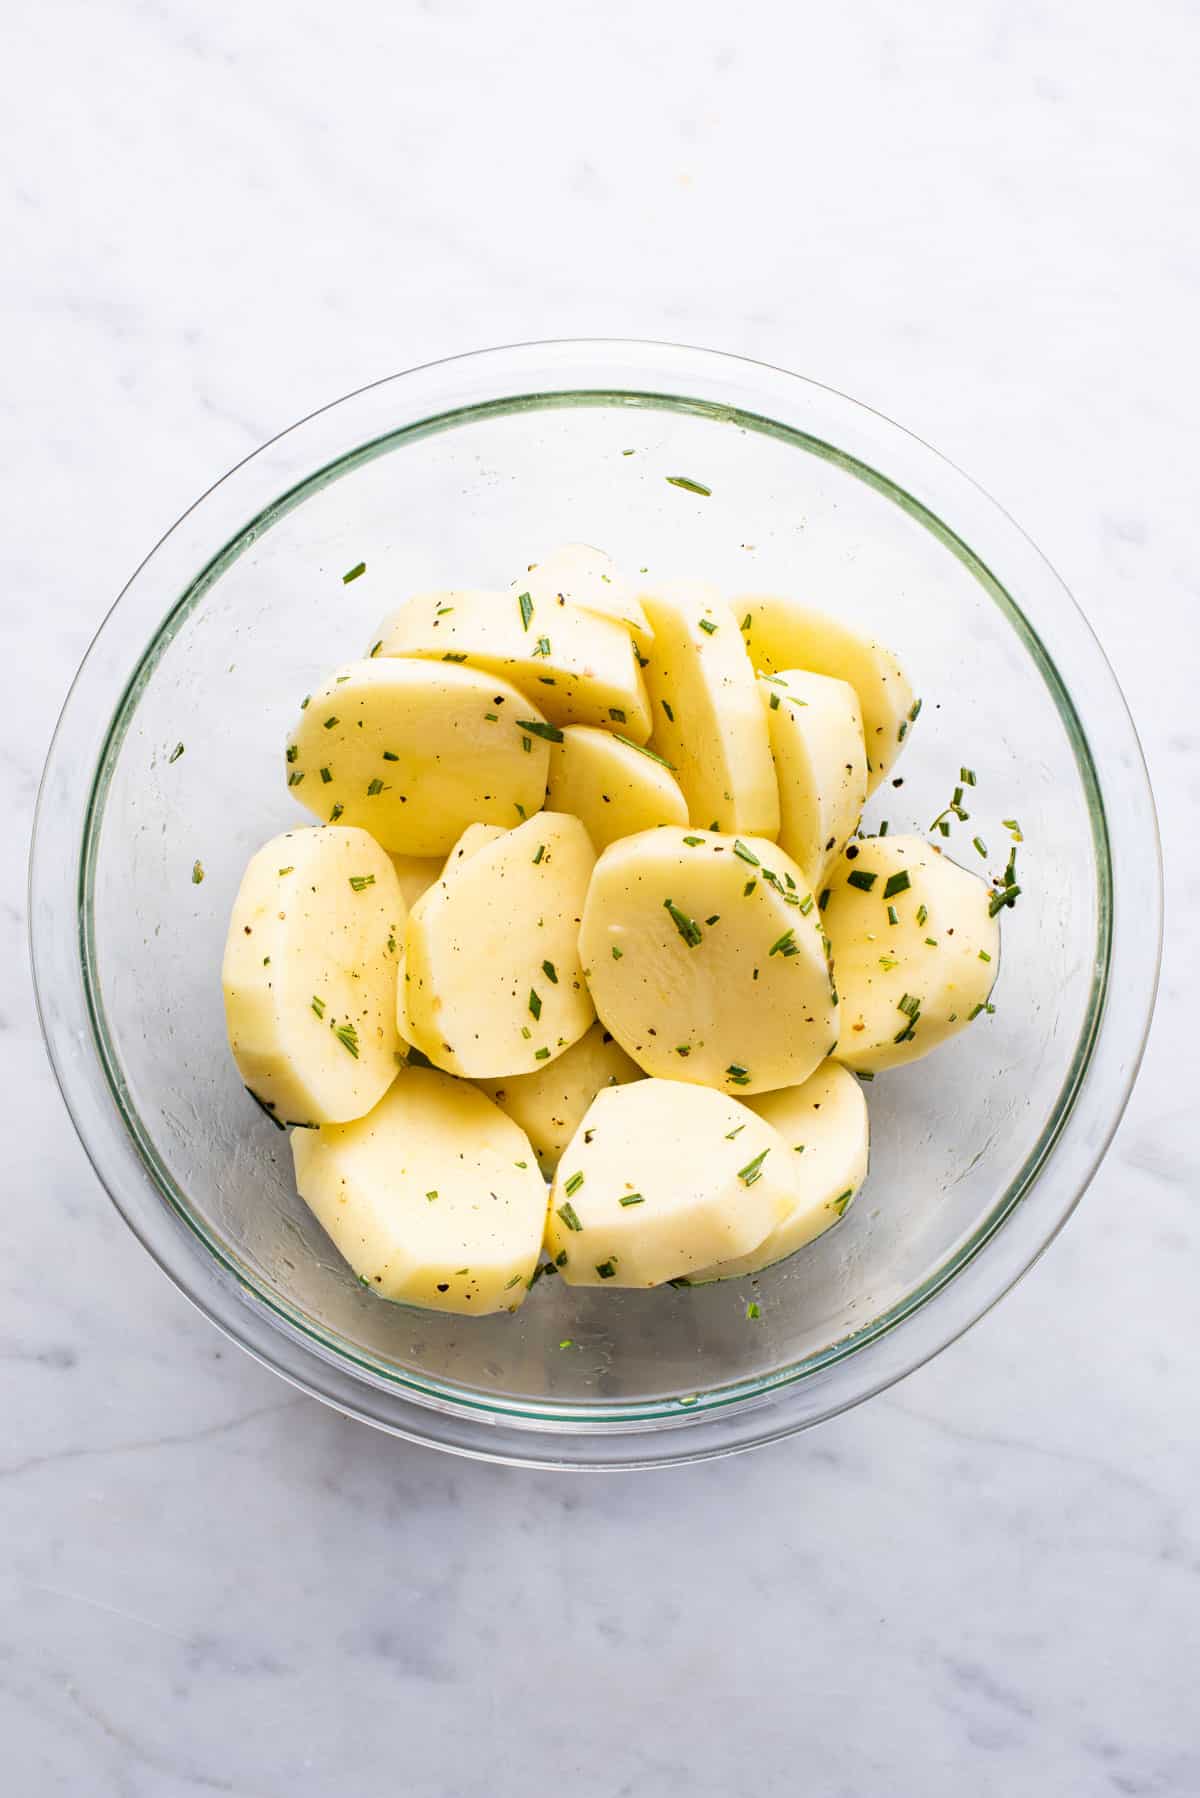 Sliced potatoes in a glass bowl with oil and rosemary.